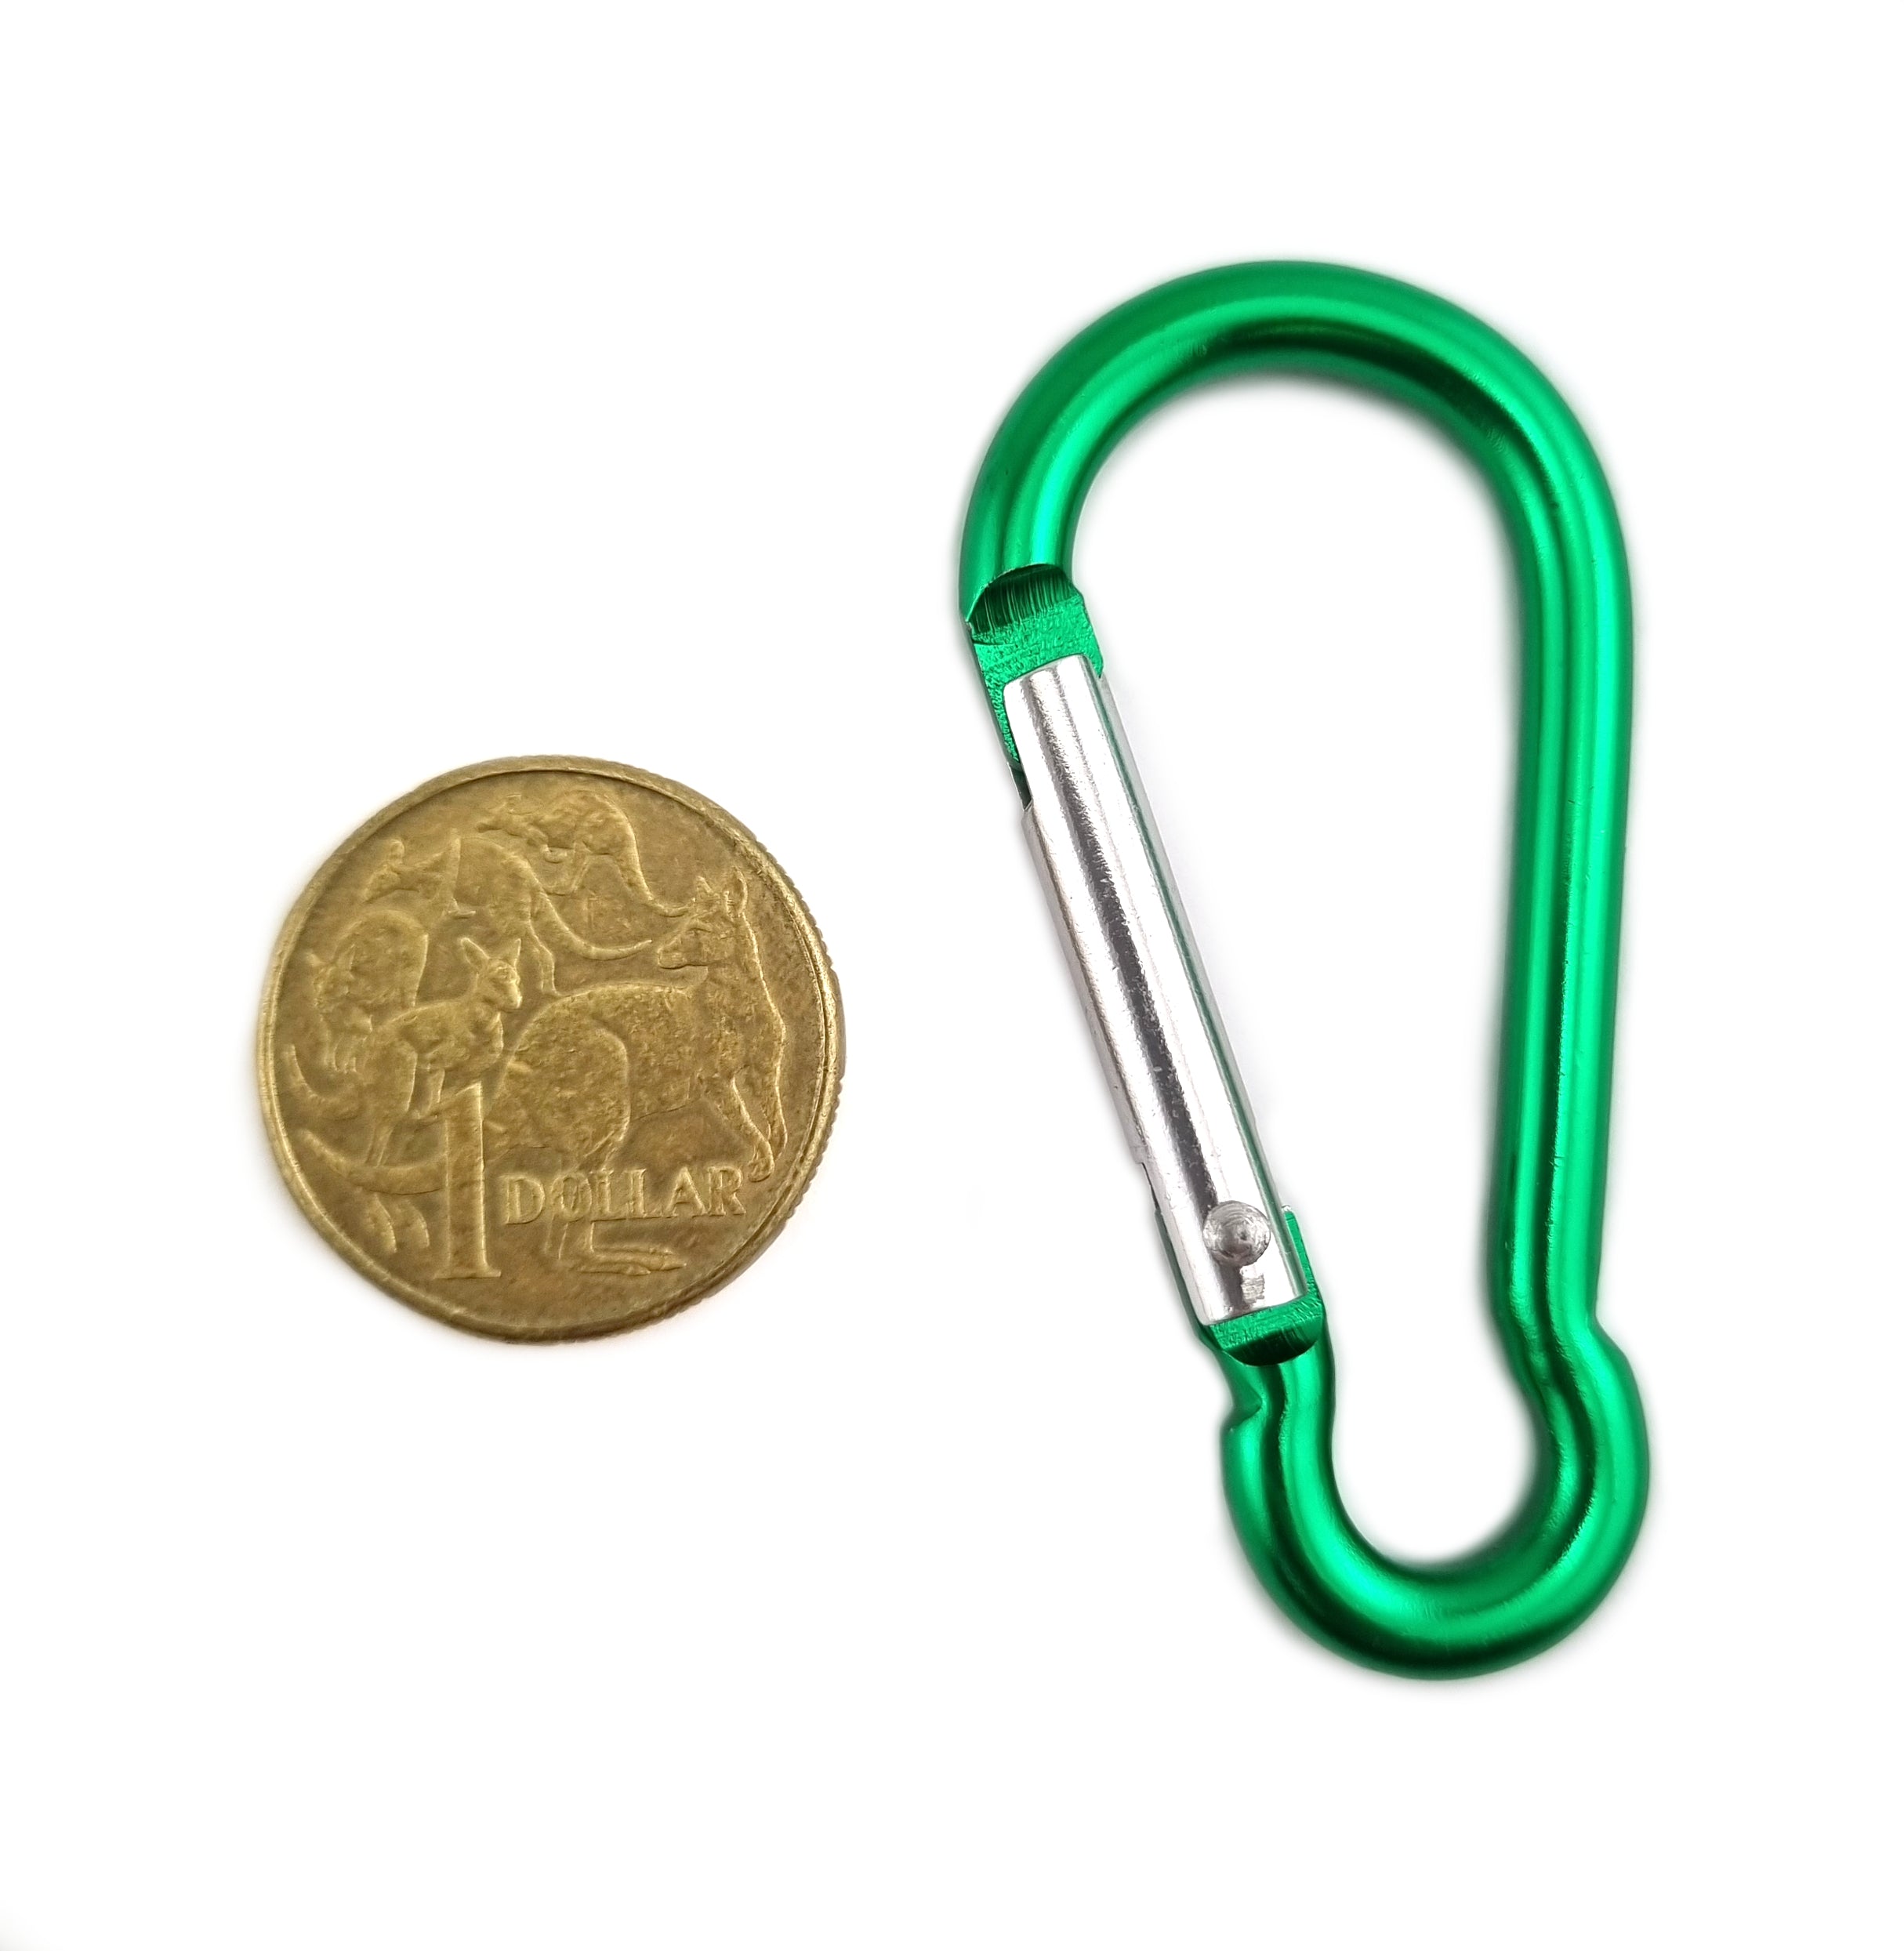 Aluminium snap hook carabiner in green, size 5mm, untested. Shop snap shackles and hardware online chain.com.au